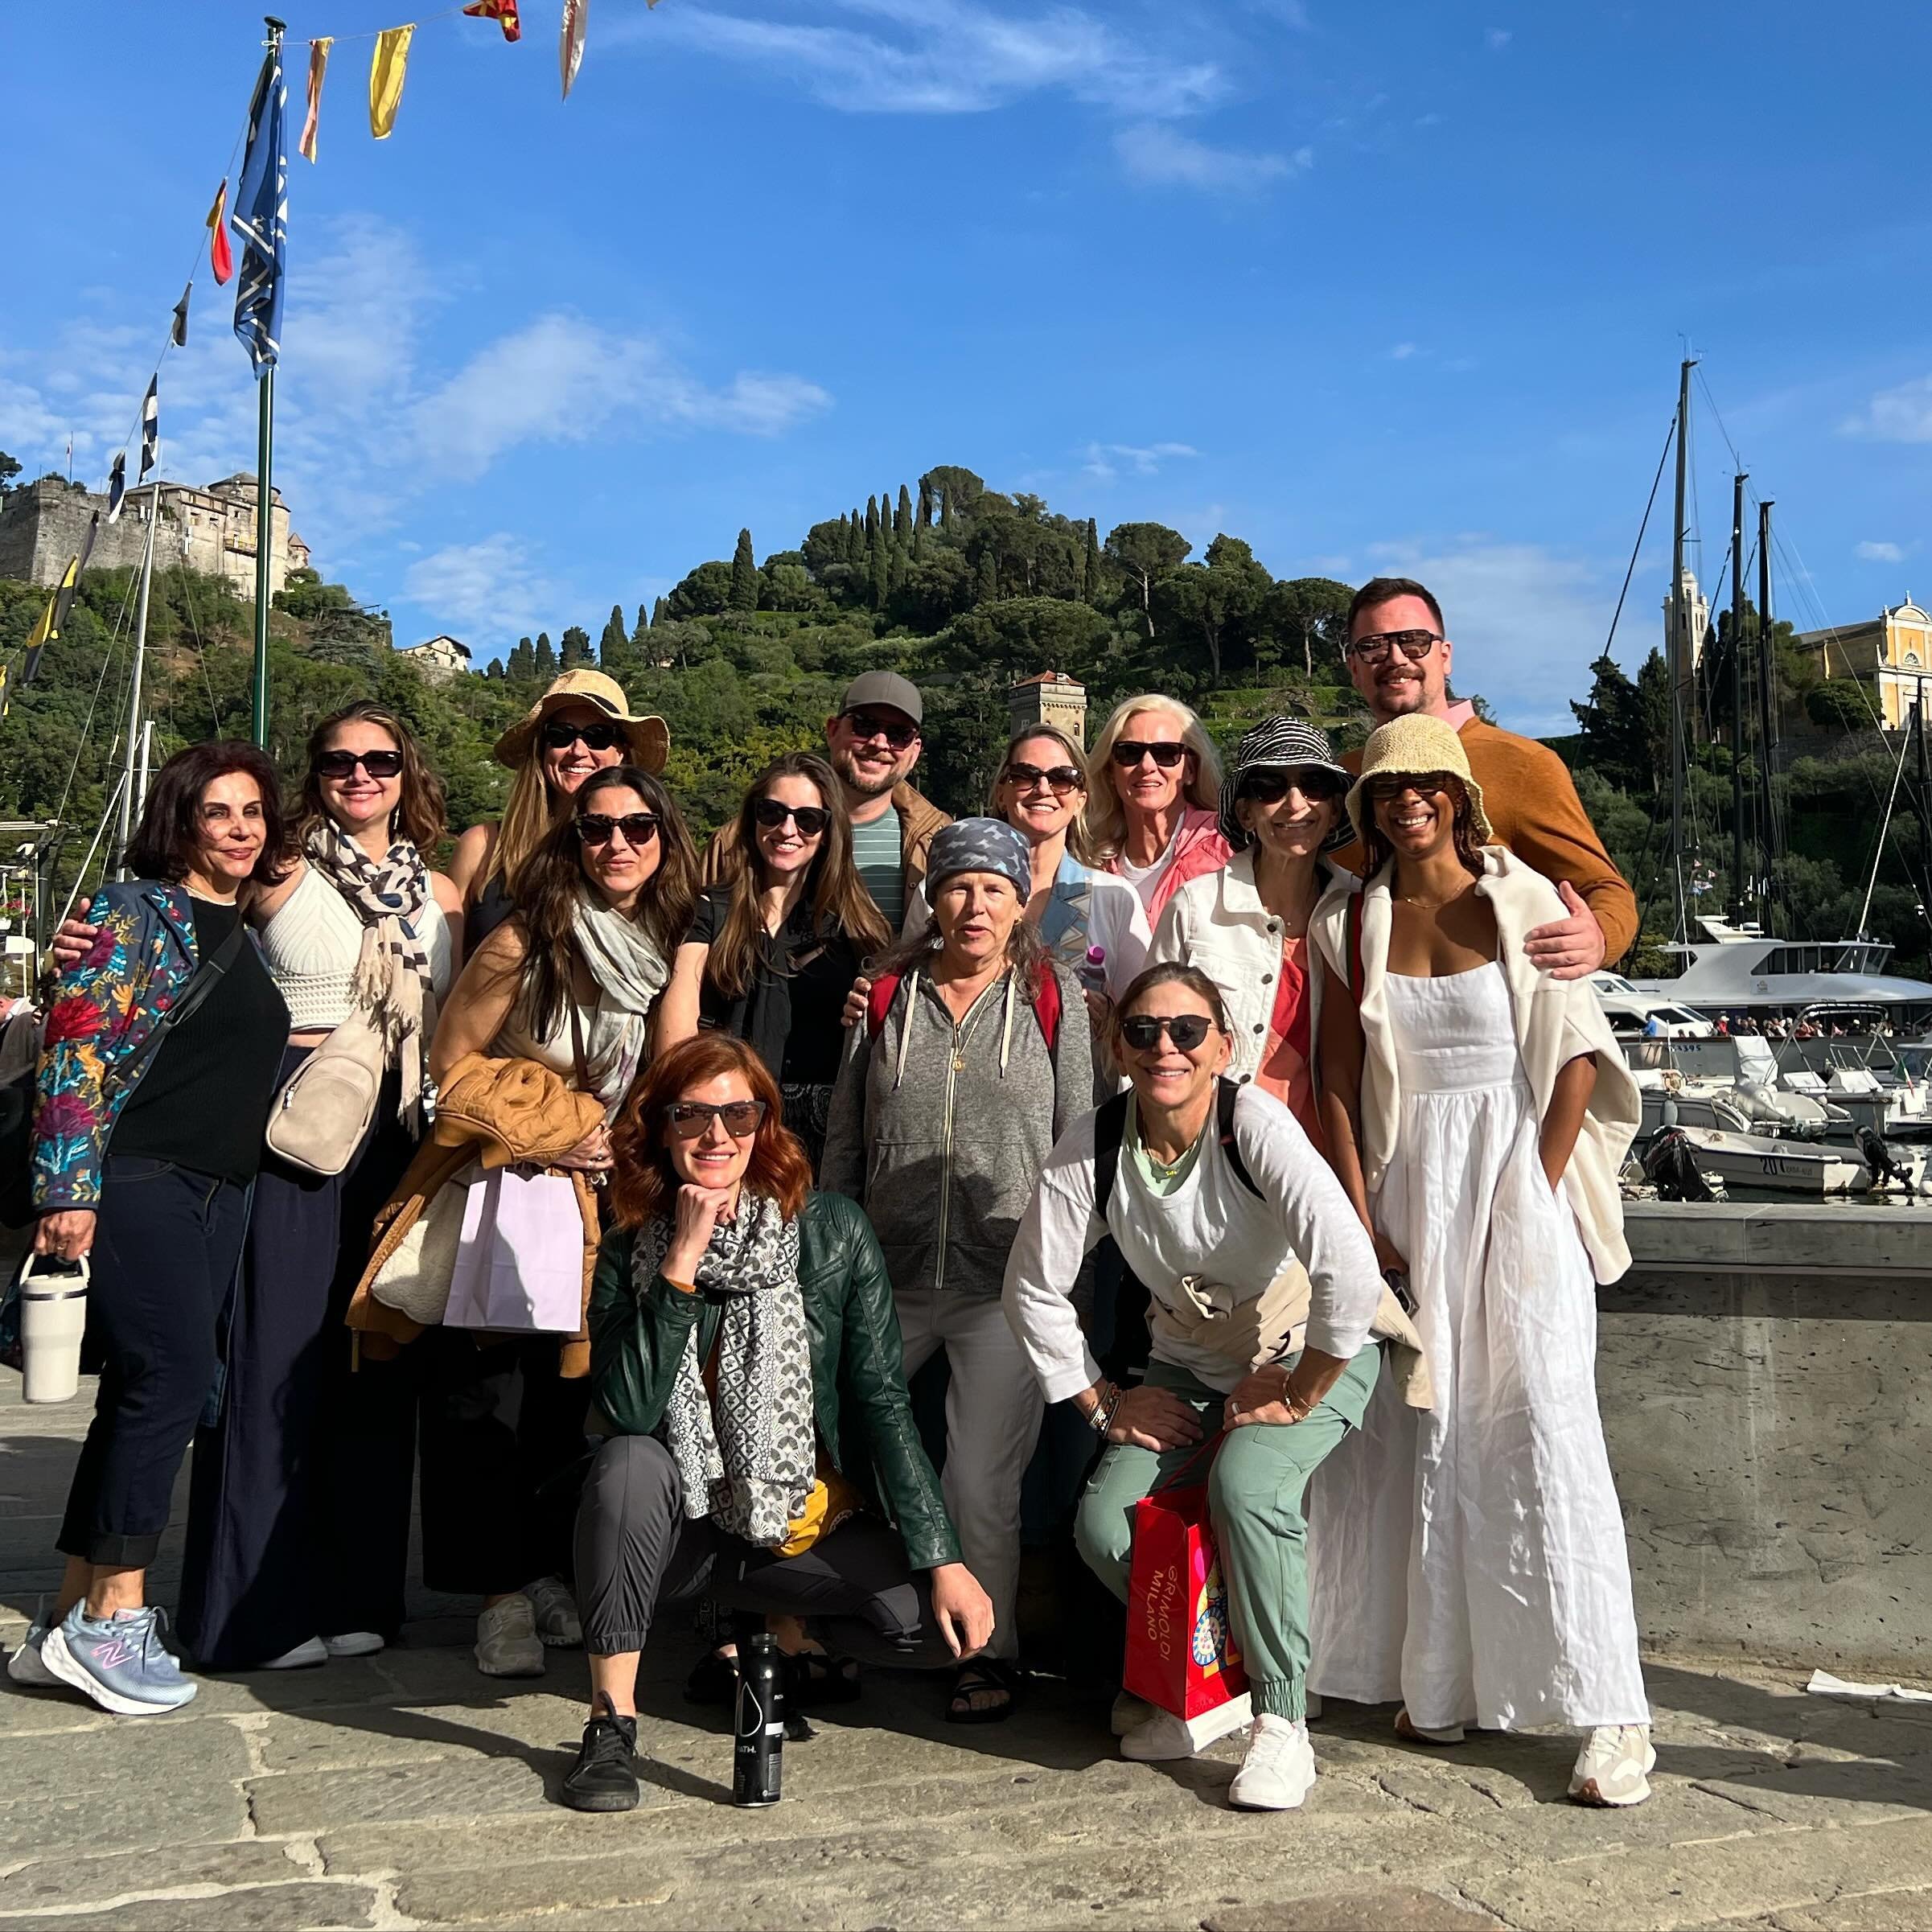 There are no words to express how grateful I am to be here in Italy with this amazing group. It brings me immense joy to bring people together and to share the benefits of yoga. Being able to do both while traveling to beautiful and distant places, w